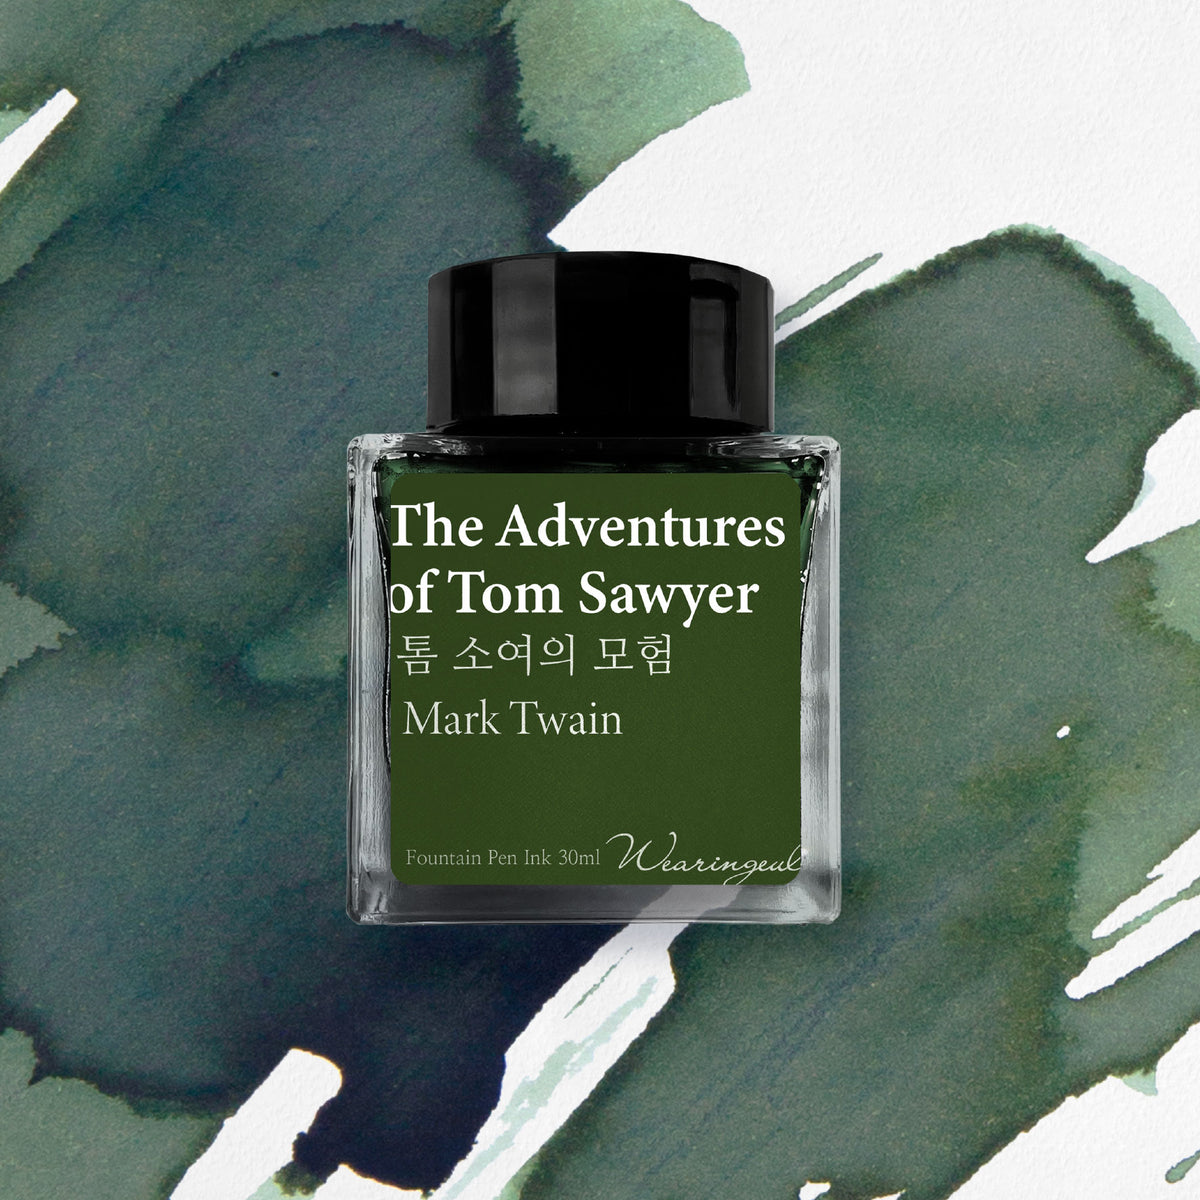 Wearingeul - Fountain Pen Ink - The Adventures of Tom Sawyer